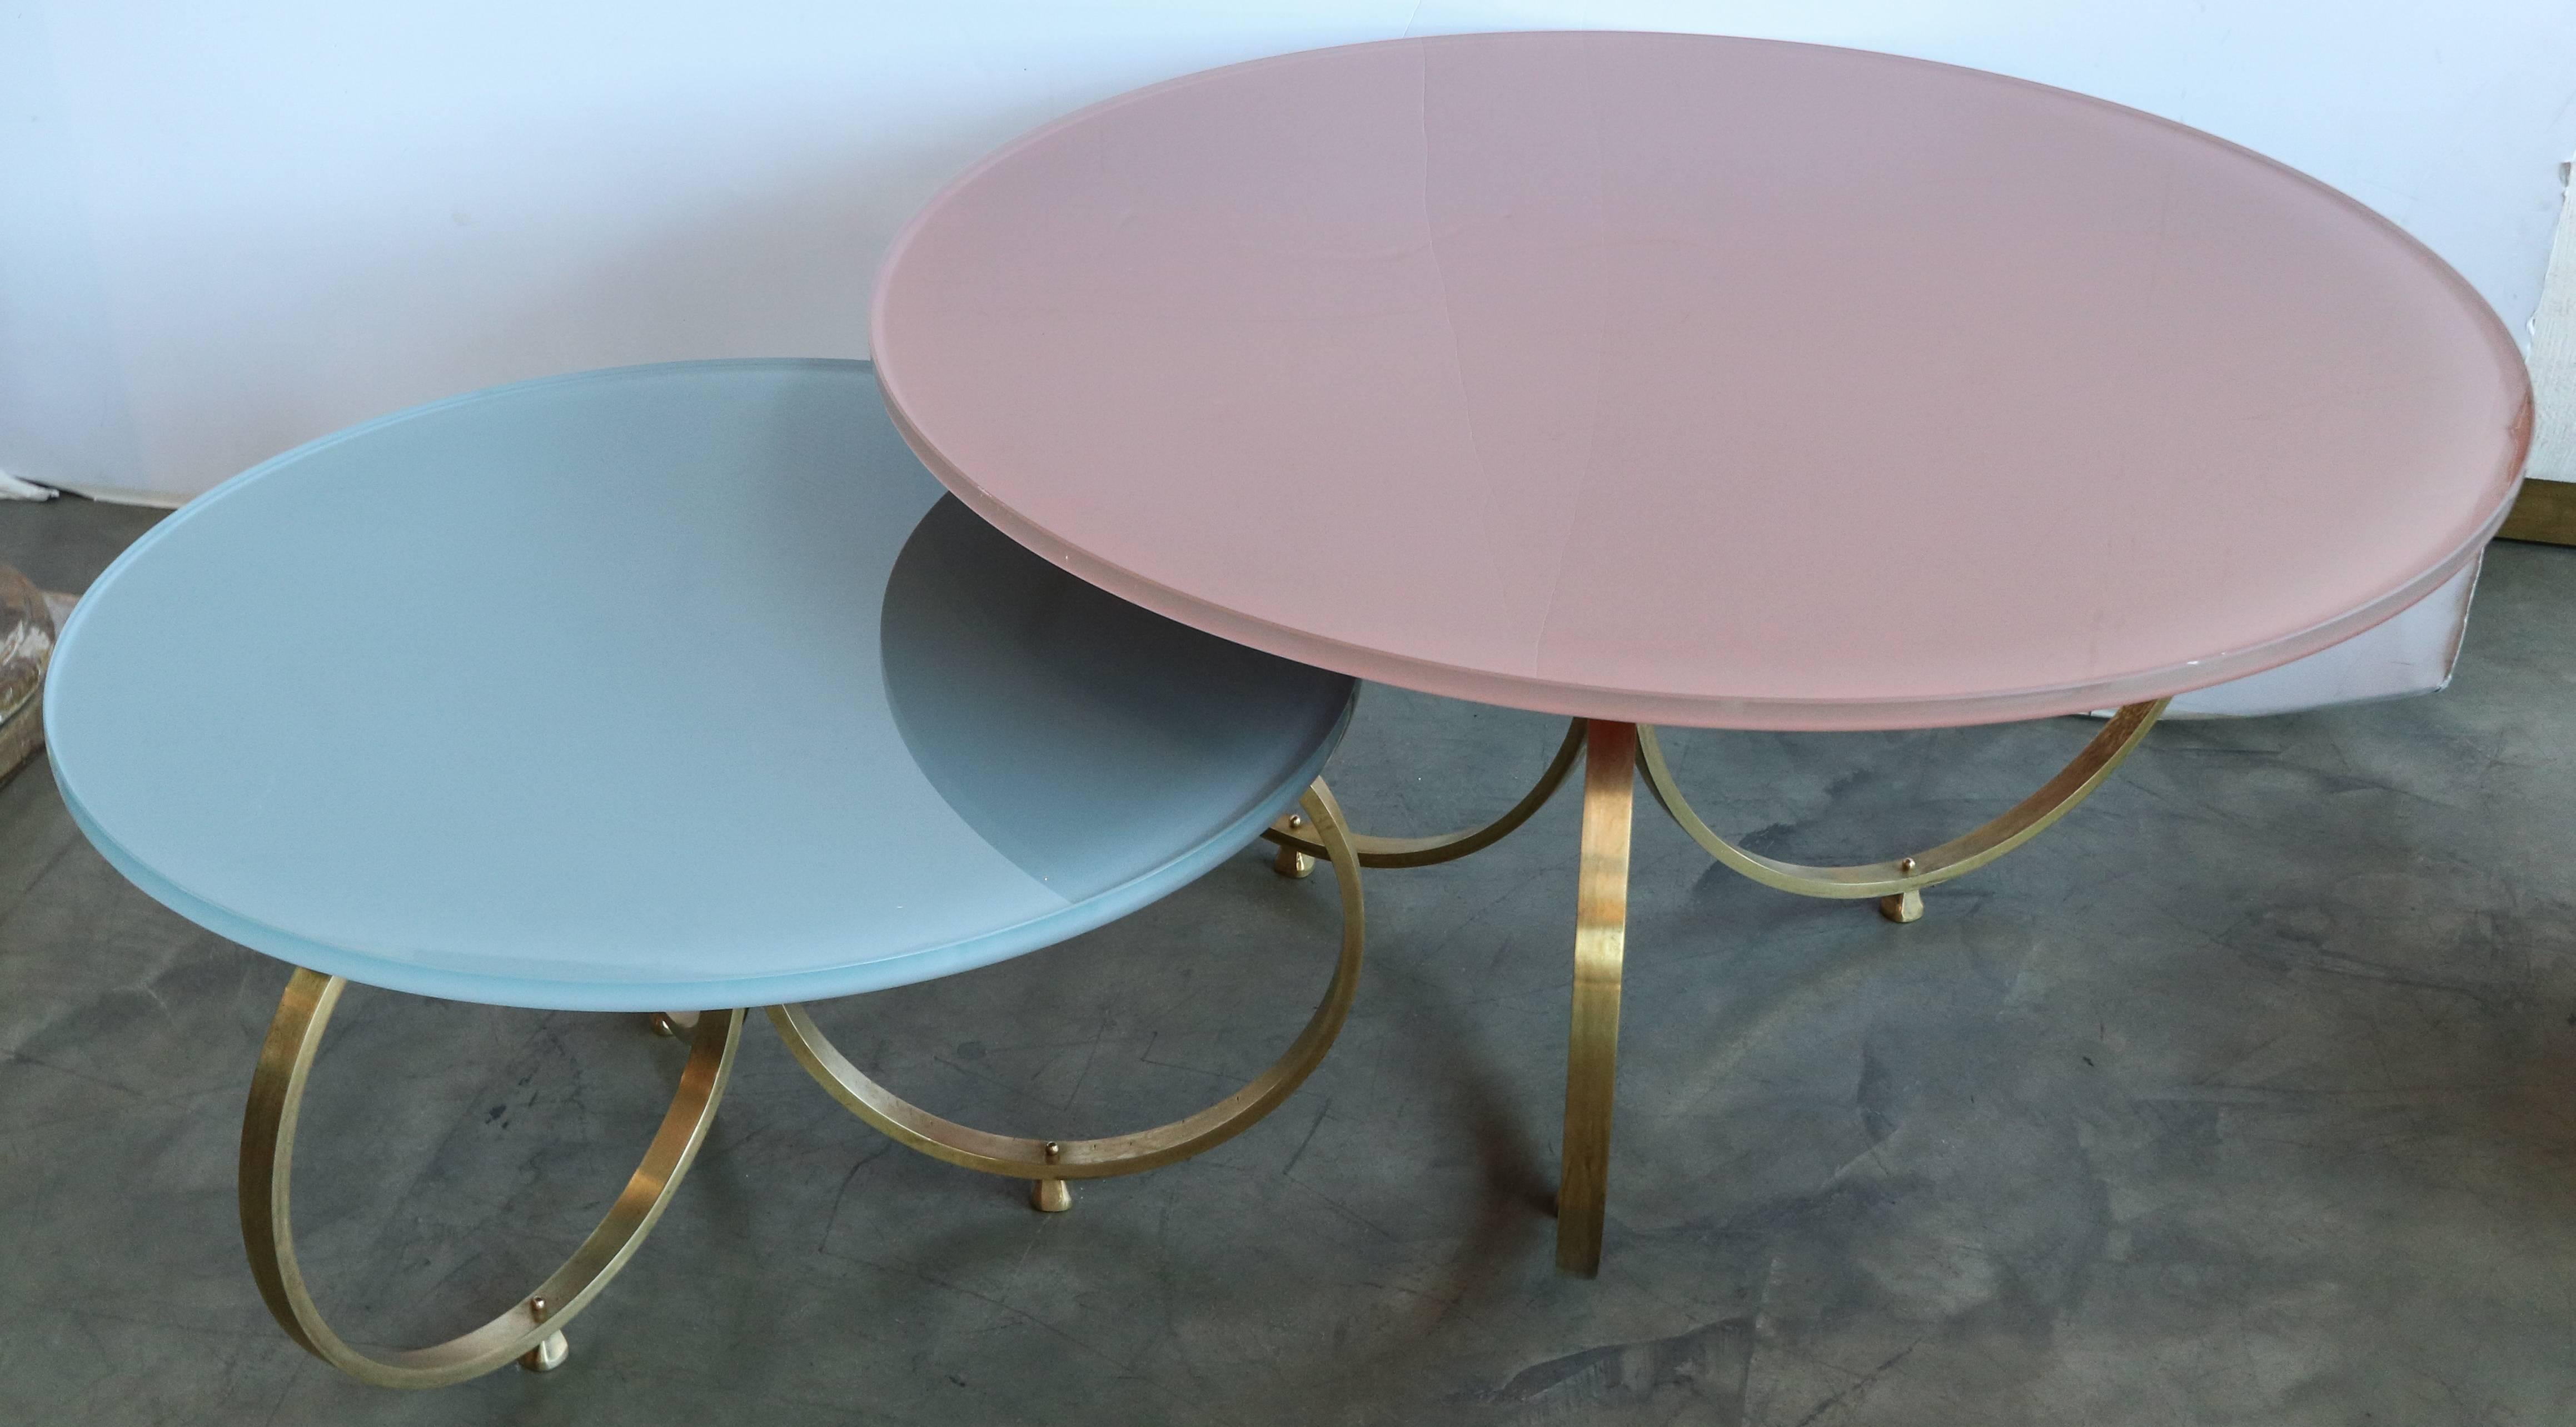 Set of two custom brass coffee tables with reverse painted glass tops in pink and grey blue.  Handmade in Los Angeles by Adesso Imports. Can be done in any color and multiple metals and finishes

Dimensions:
Small 30in diameter x 16.75in high
Large